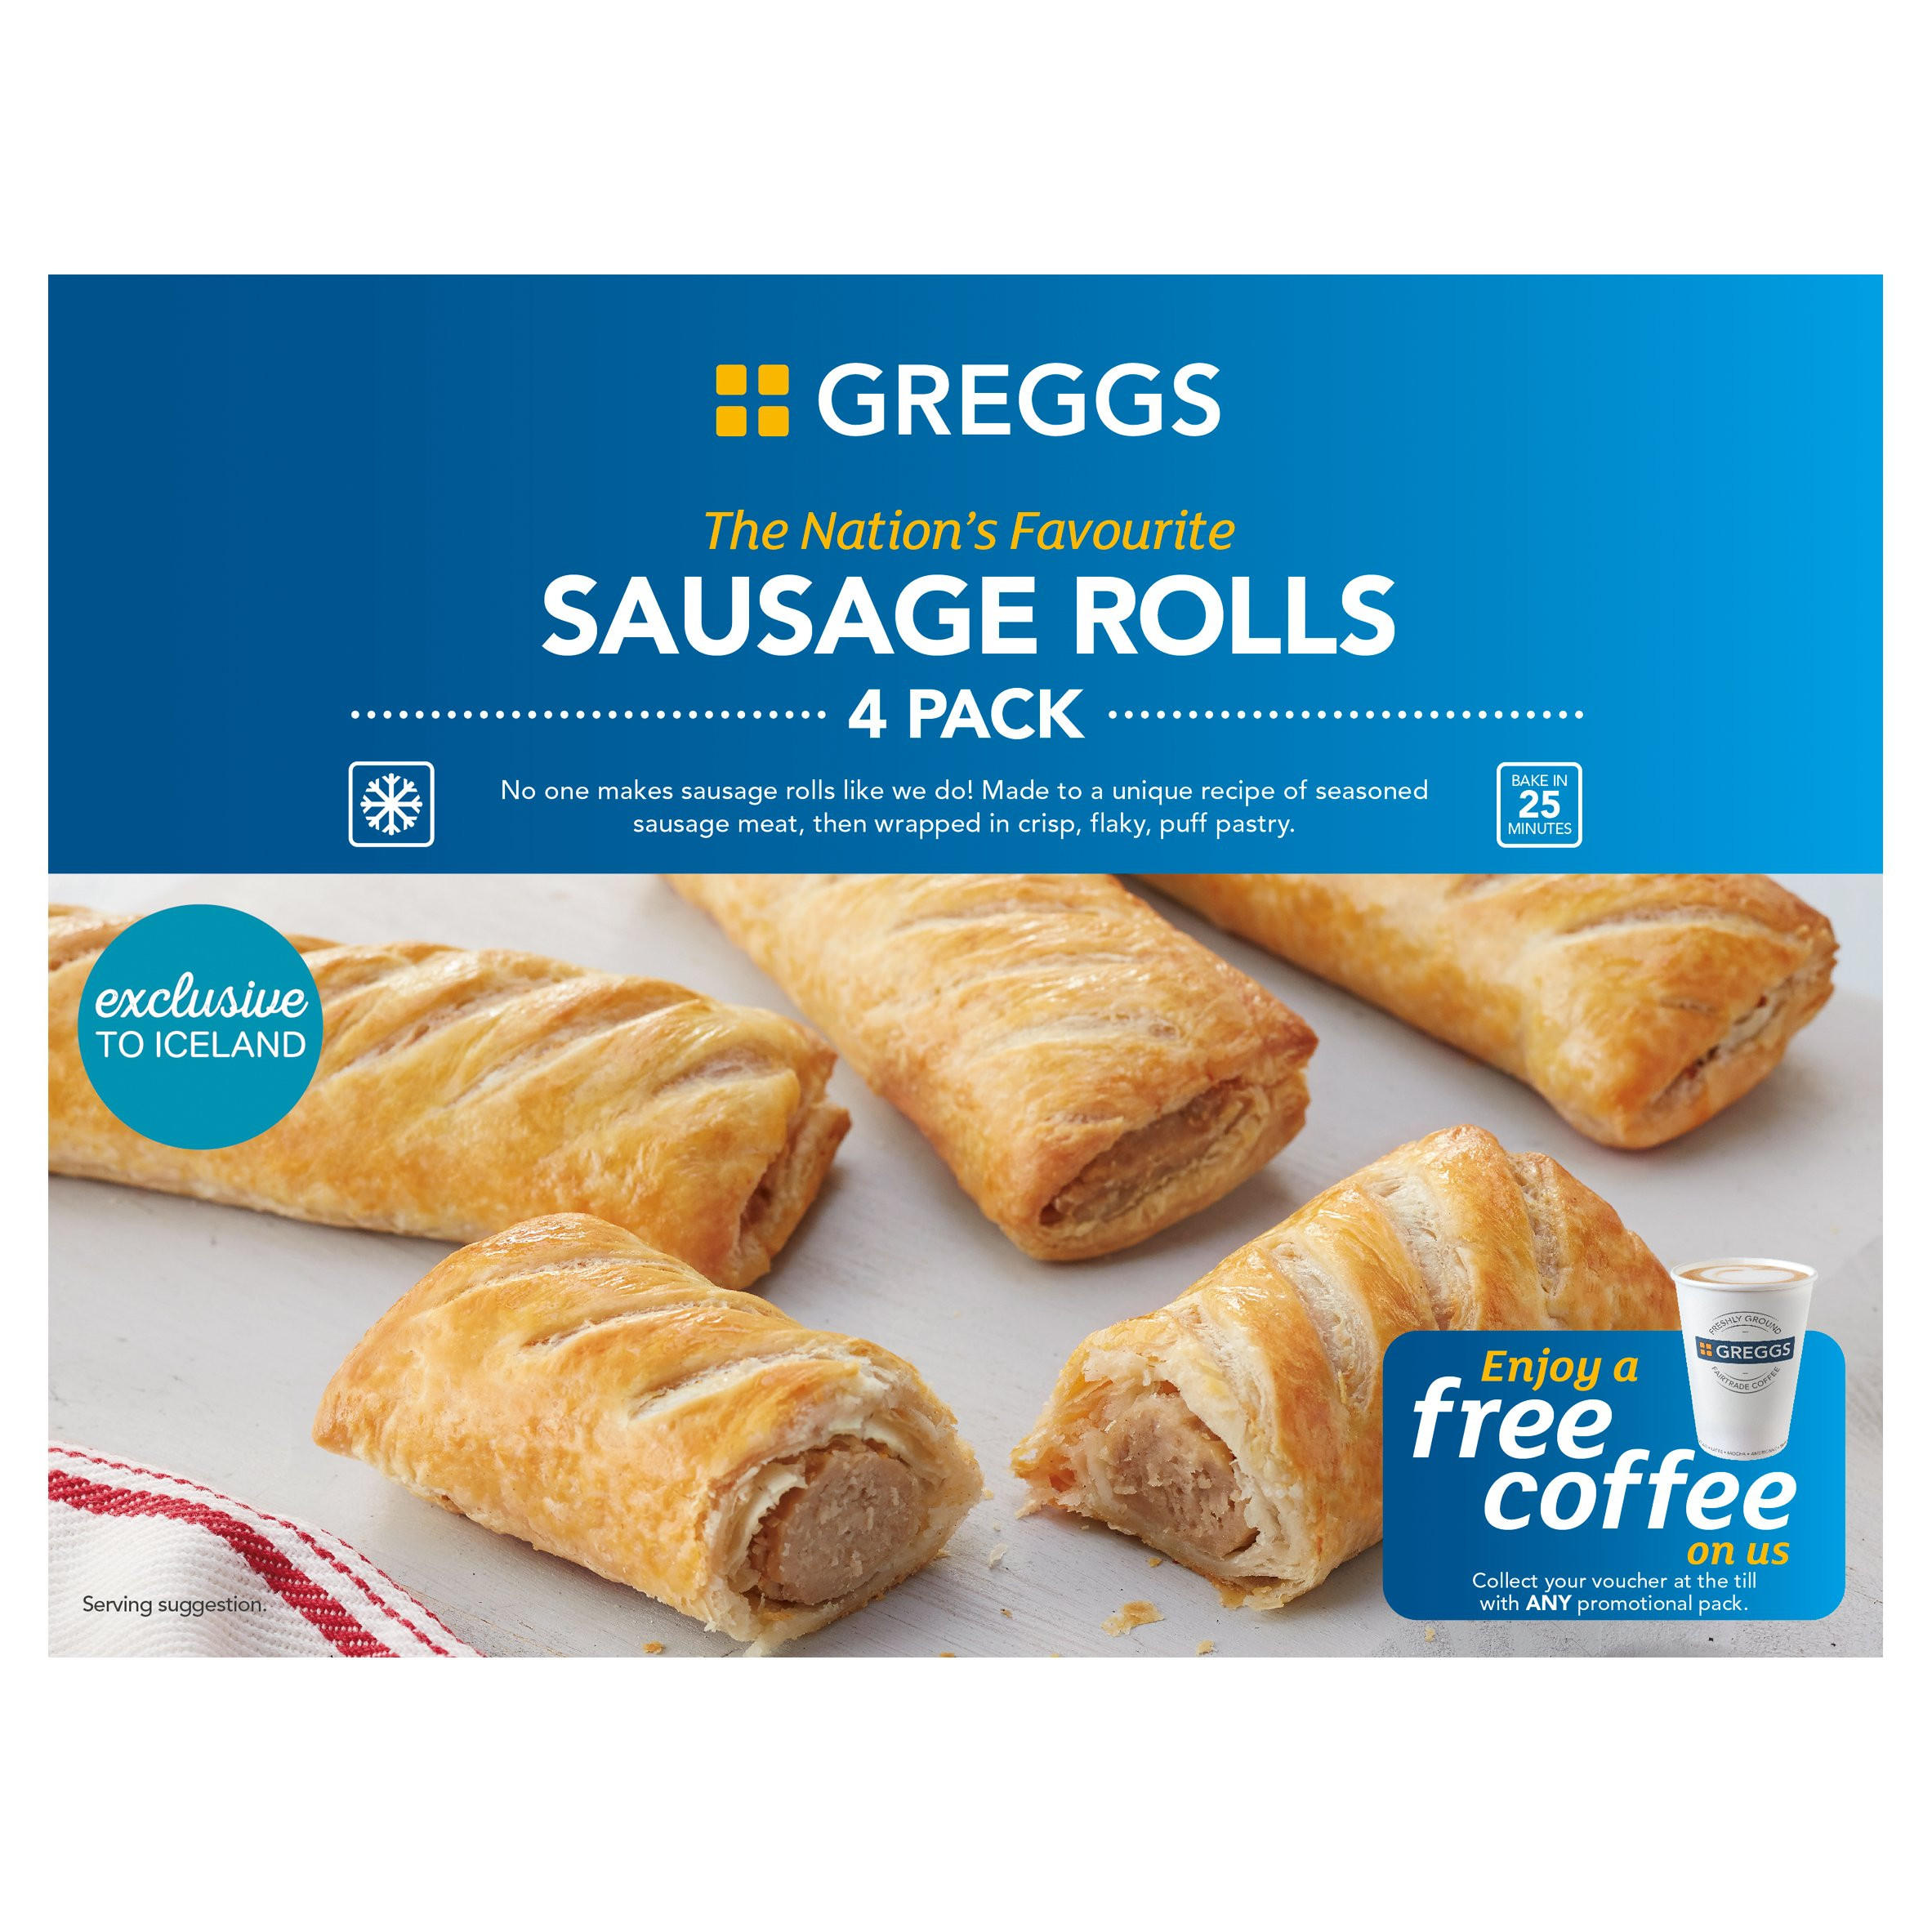 I taste-tested Morrisons, Greggs and Olivers sausage rolls and was